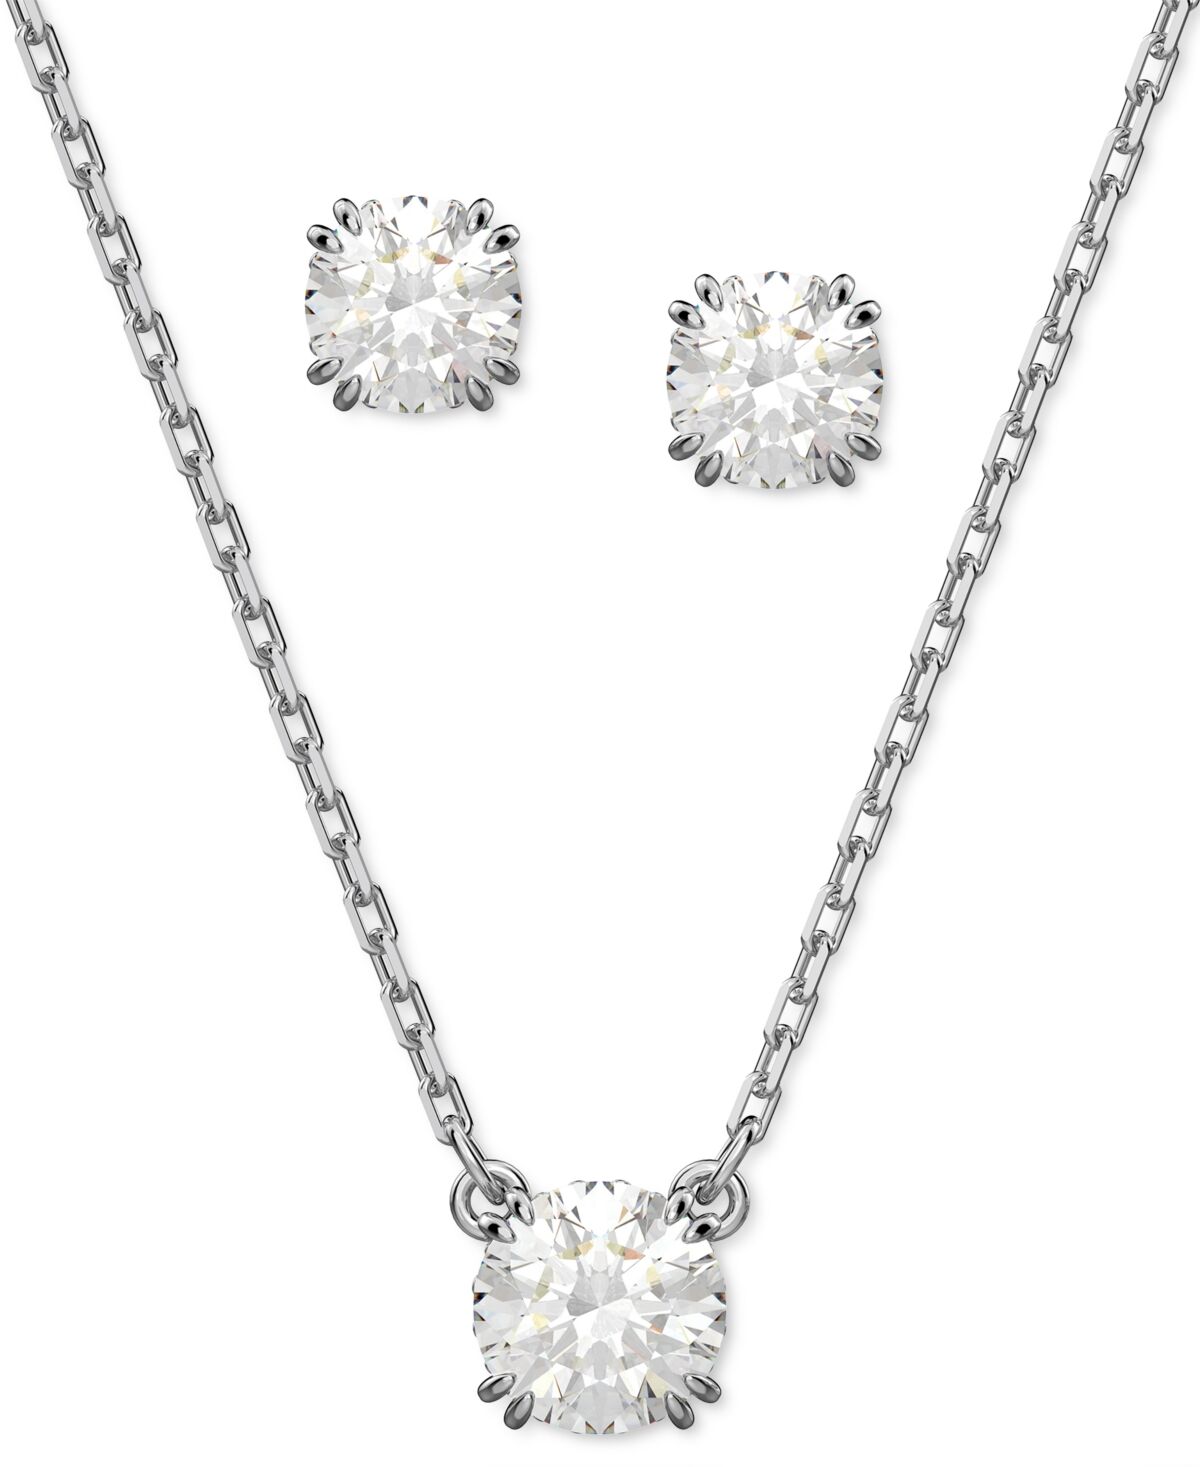 Swarovski Silver-Tone 2-Pc. Set Crystal Earrings and Necklace, 14-7/8